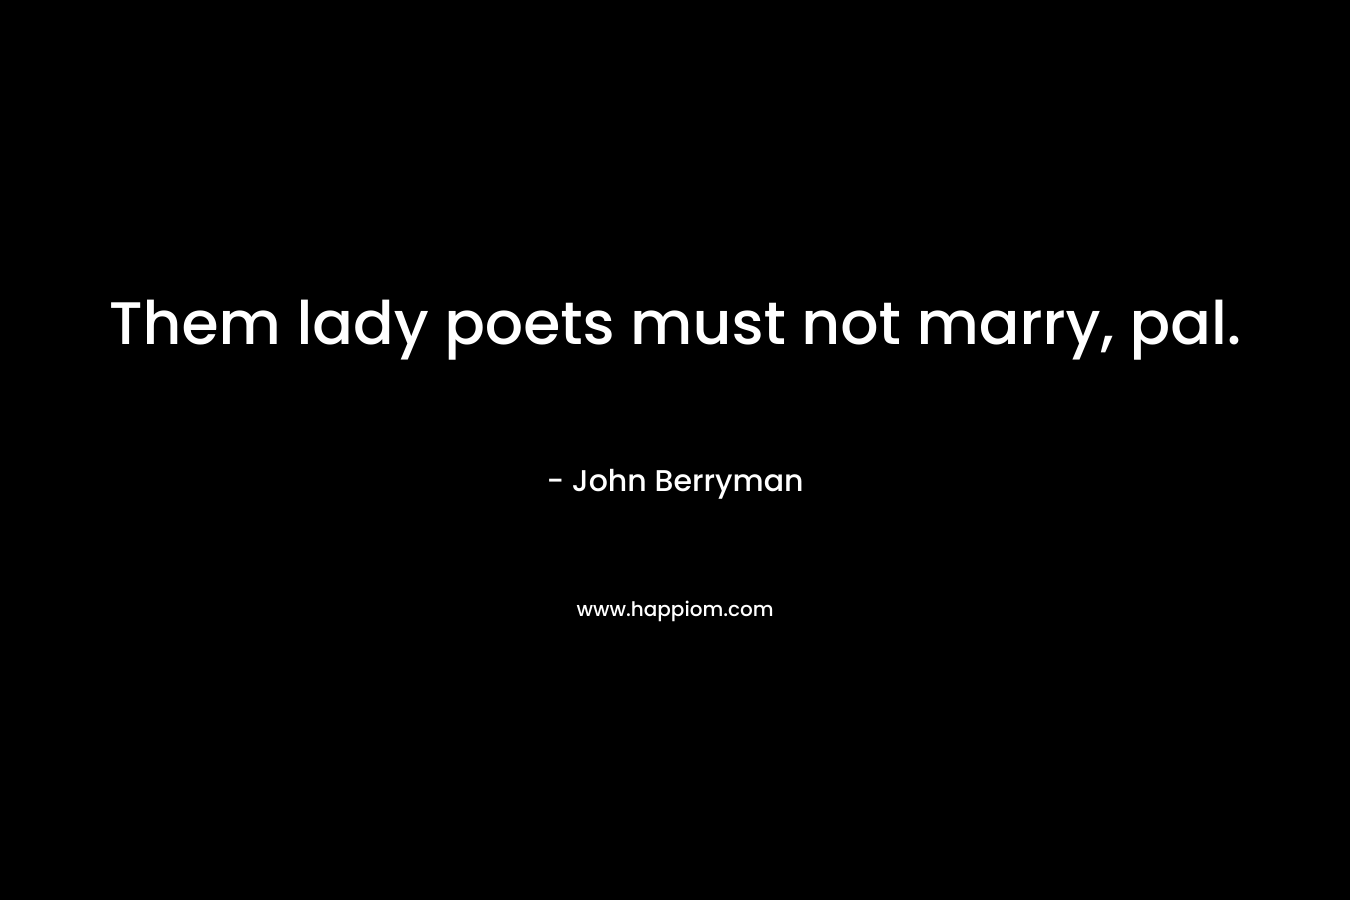 Them lady poets must not marry, pal.